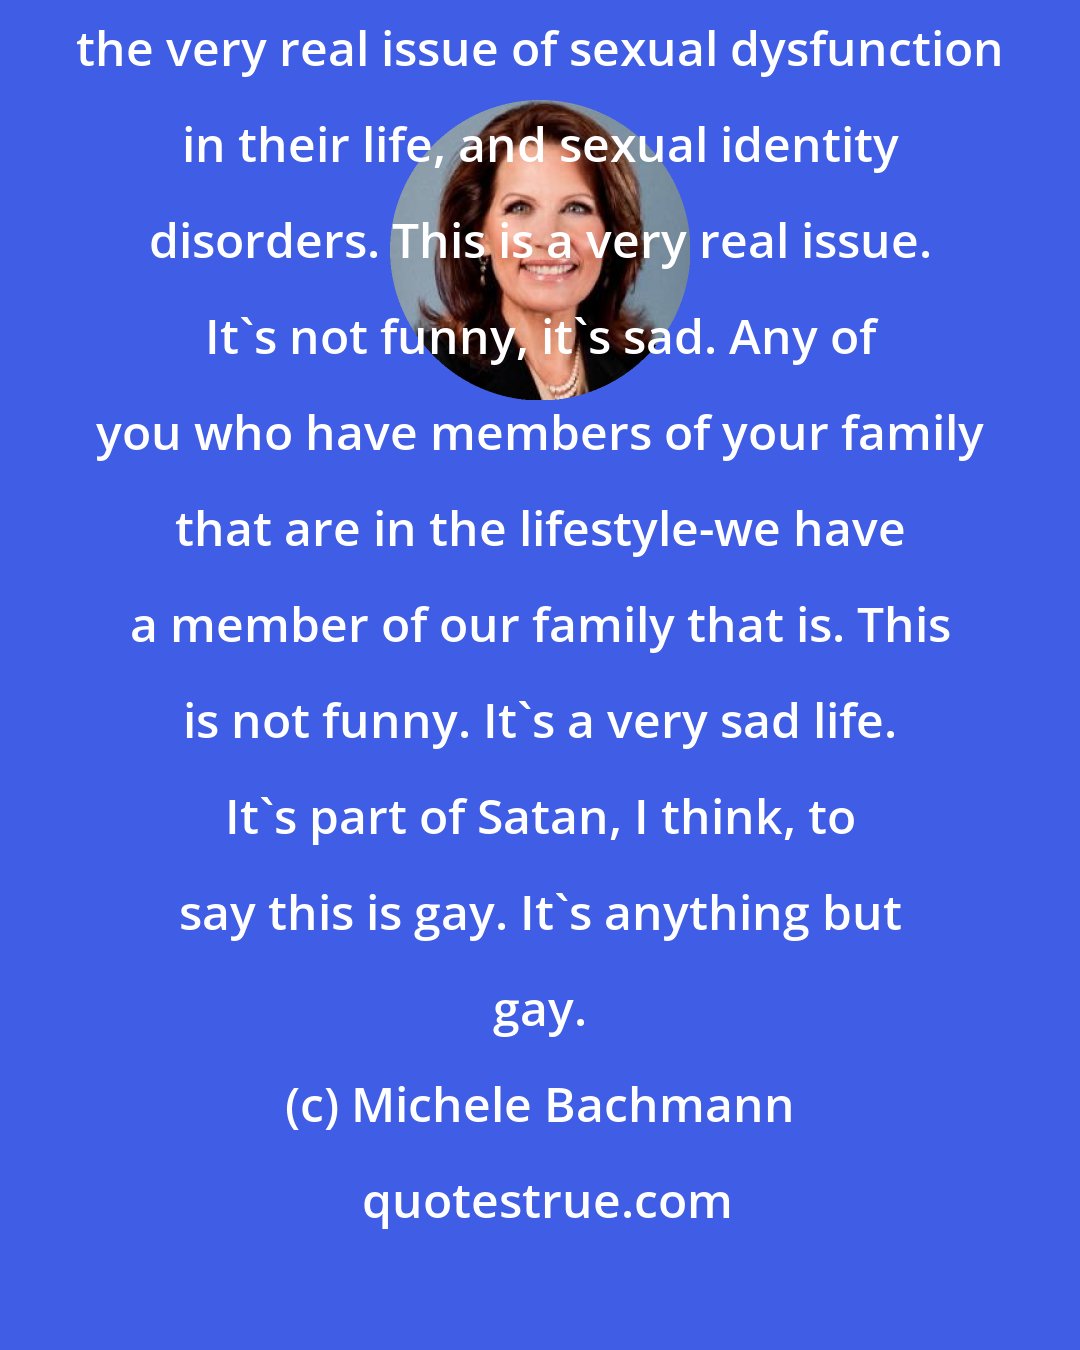 Michele Bachmann: We need to have profound compassion for the people who are dealing with the very real issue of sexual dysfunction in their life, and sexual identity disorders. This is a very real issue. It's not funny, it's sad. Any of you who have members of your family that are in the lifestyle-we have a member of our family that is. This is not funny. It's a very sad life. It's part of Satan, I think, to say this is gay. It's anything but gay.